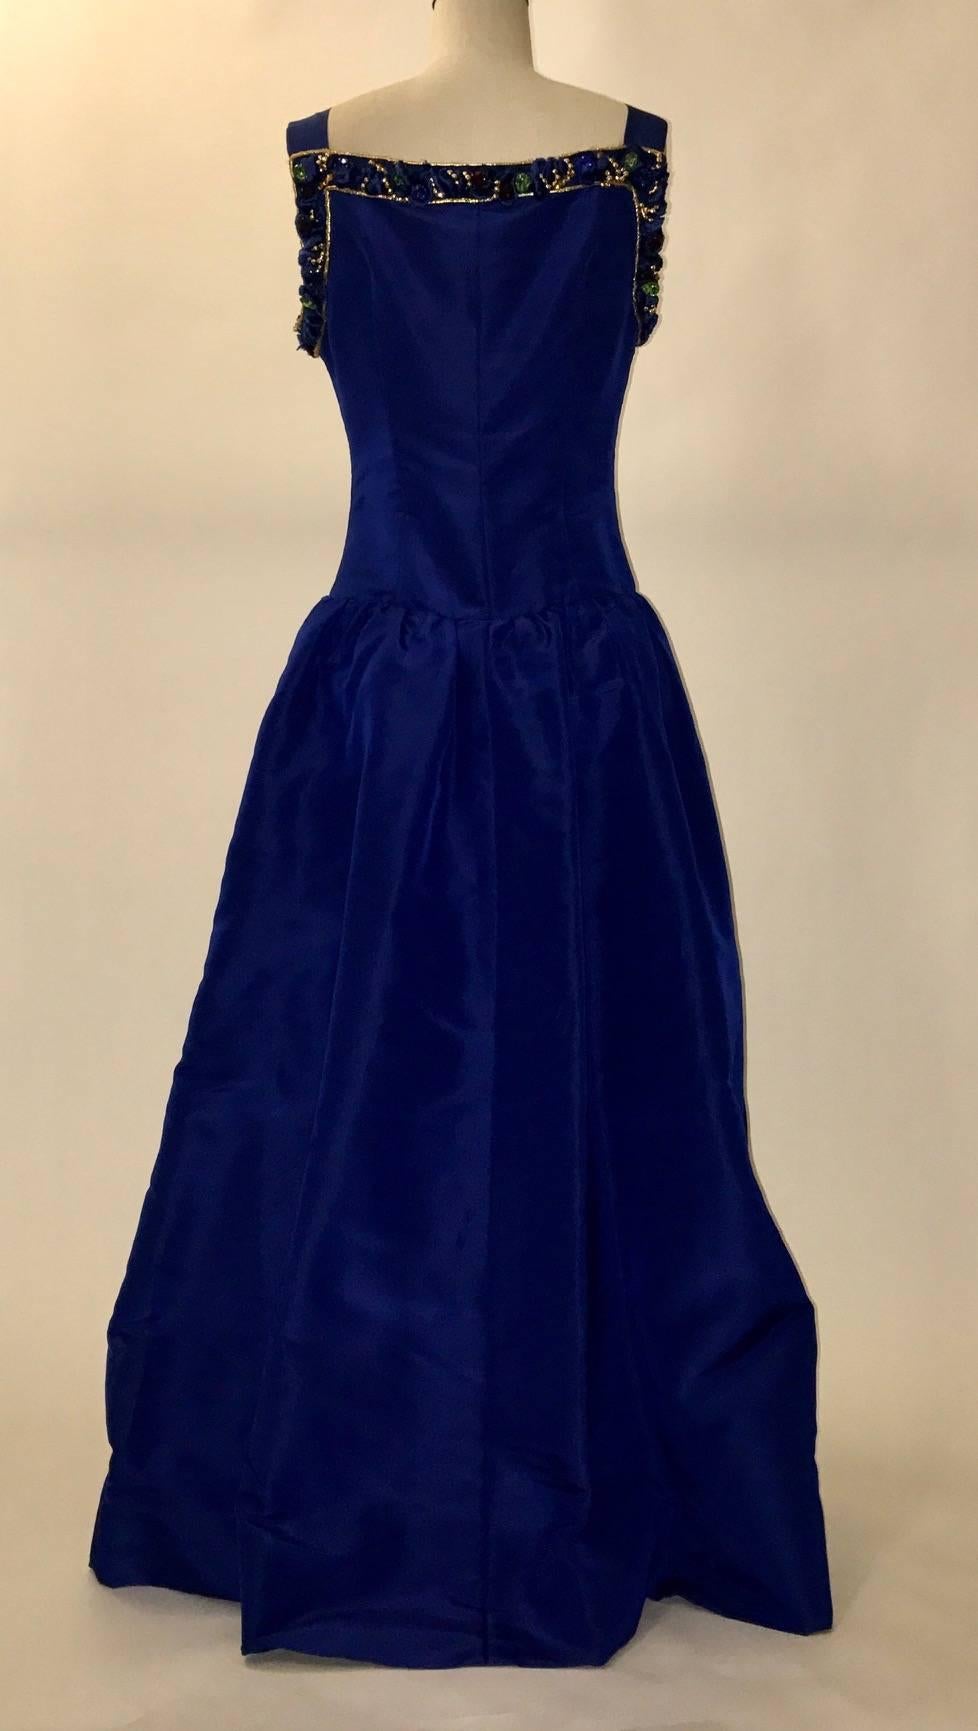 Stunning Givenchy Couture vintage (1980's?) cobalt blue evening gown with gold trim and beaded embellishment at neck. Side zip, fully lined, side slip pockets.

No content label, seems like mid-weight silk faille.

Made in France.

Labelled